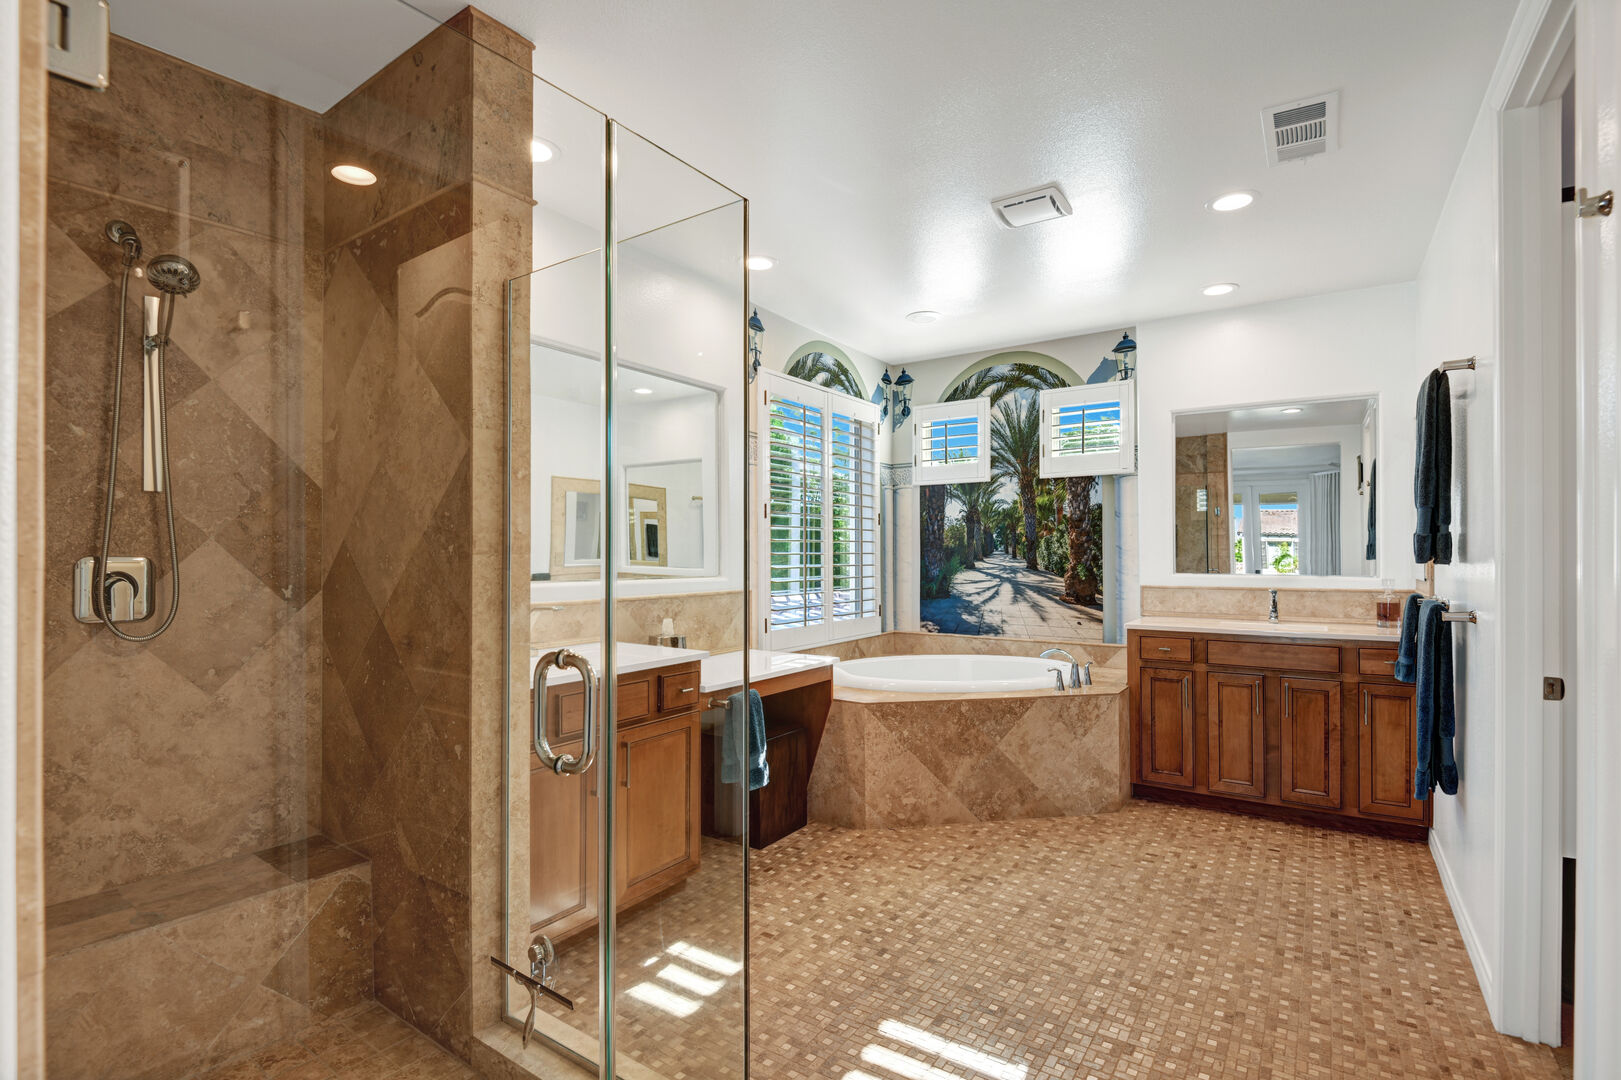 Master Suite 1 bathroom boasts his and her vanity sinks, a relaxing soaking tub, and a tiled shower.